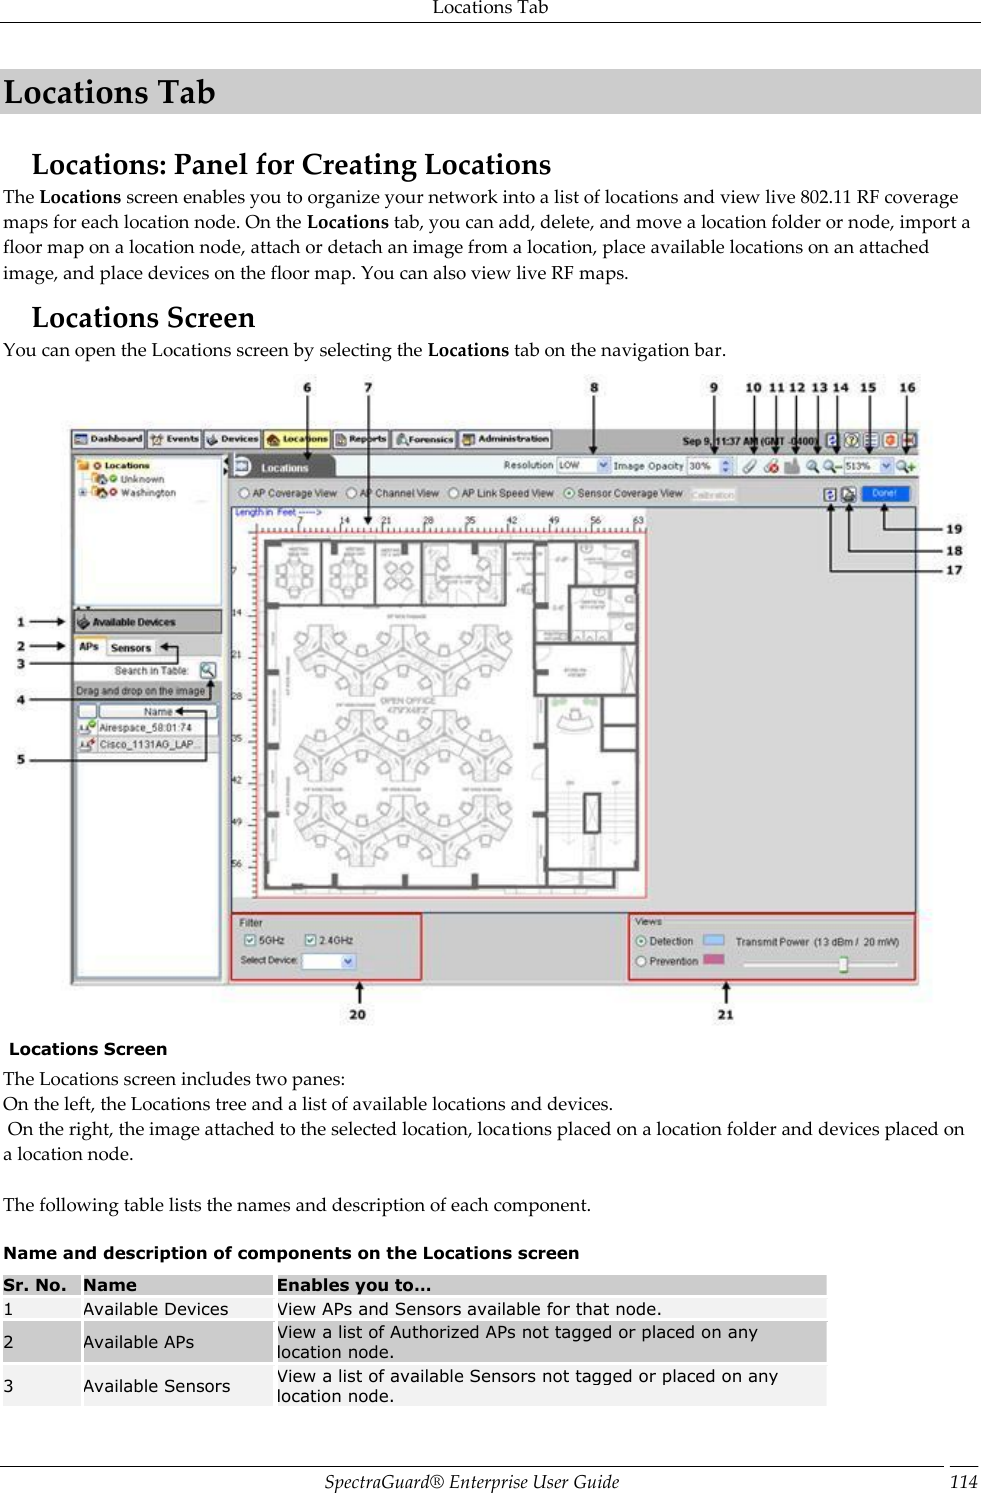 Locations Tab SpectraGuard®  Enterprise User Guide 114 Locations Tab Locations: Panel for Creating Locations The Locations screen enables you to organize your network into a list of locations and view live 802.11 RF coverage maps for each location node. On the Locations tab, you can add, delete, and move a location folder or node, import a floor map on a location node, attach or detach an image from a location, place available locations on an attached image, and place devices on the floor map. You can also view live RF maps. Locations Screen You can open the Locations screen by selecting the Locations tab on the navigation bar.   Locations Screen The Locations screen includes two panes: On the left, the Locations tree and a list of available locations and devices.  On the right, the image attached to the selected location, locations placed on a location folder and devices placed on a location node.   The following table lists the names and description of each component. Name and description of components on the Locations screen Sr. No. Name Enables you to… 1 Available Devices View APs and Sensors available for that node. 2 Available APs View a list of Authorized APs not tagged or placed on any location node. 3 Available Sensors View a list of available Sensors not tagged or placed on any location node. 